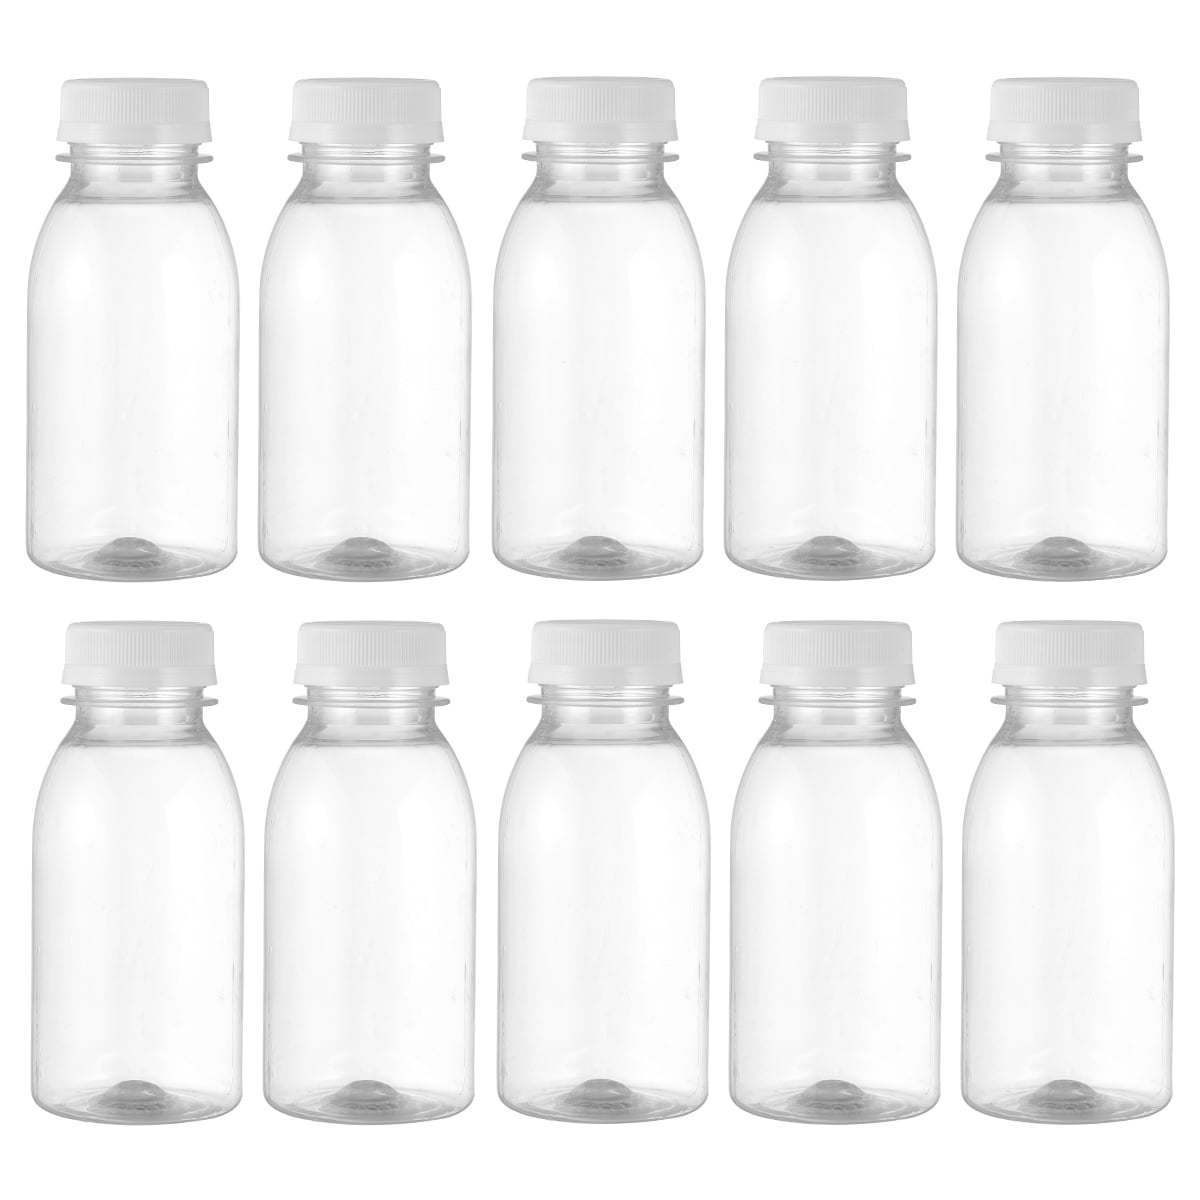 Bottles Bottle Juicedrink Beverageemptycontainers Fridge Glass Water Jugs  Drinking Mini Party Clear Smoothie Container Lids Cap